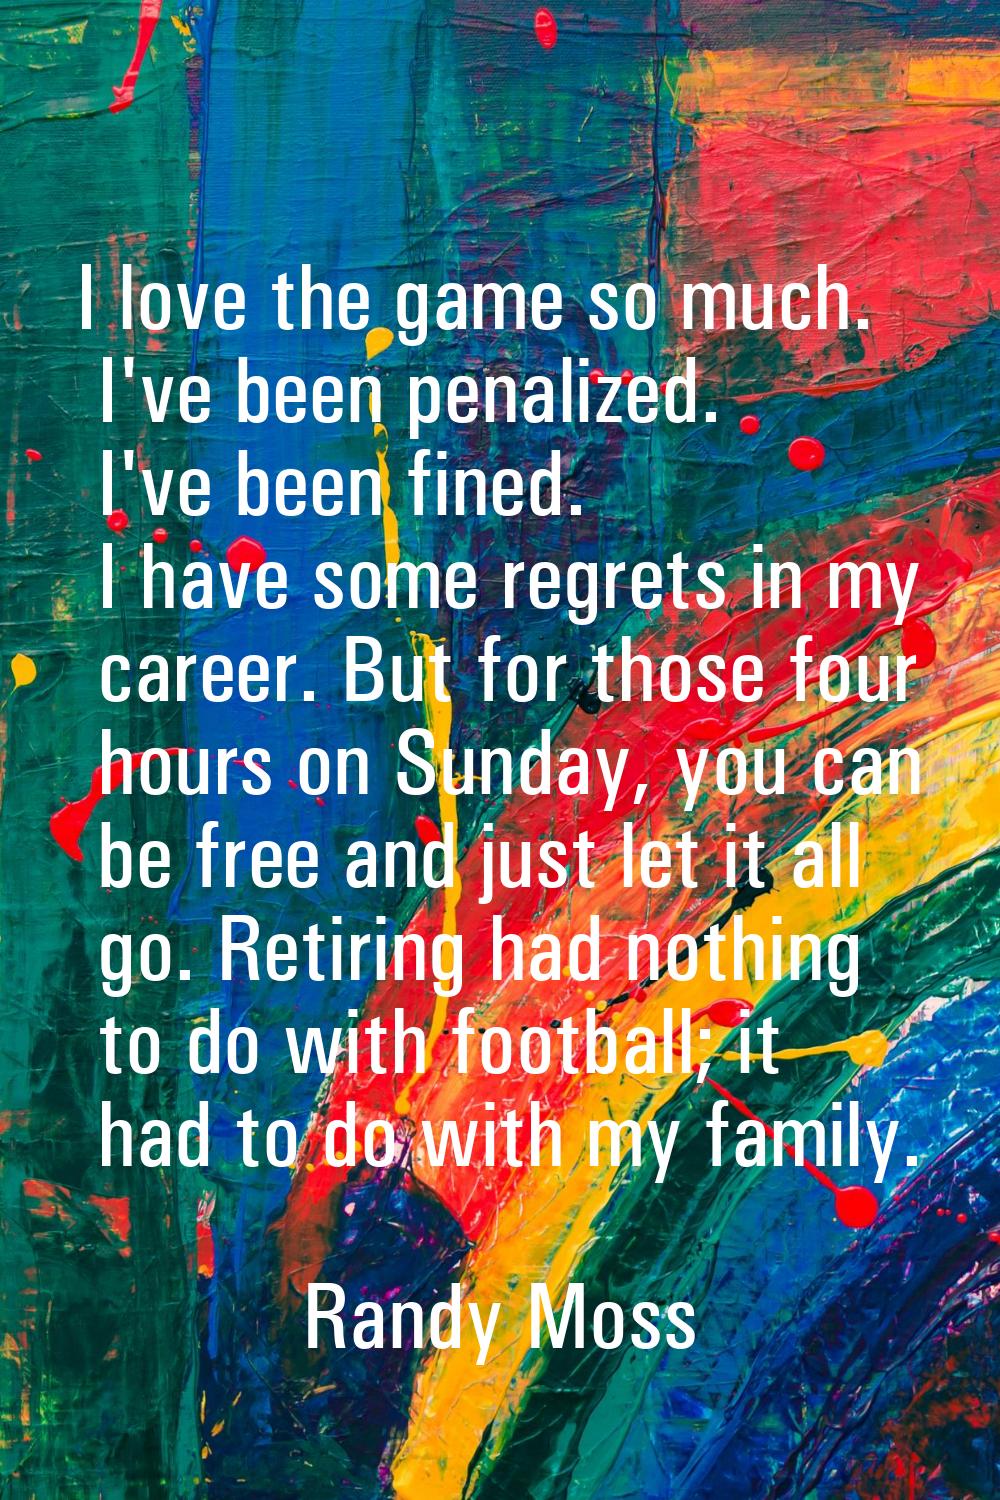 I love the game so much. I've been penalized. I've been fined. I have some regrets in my career. Bu